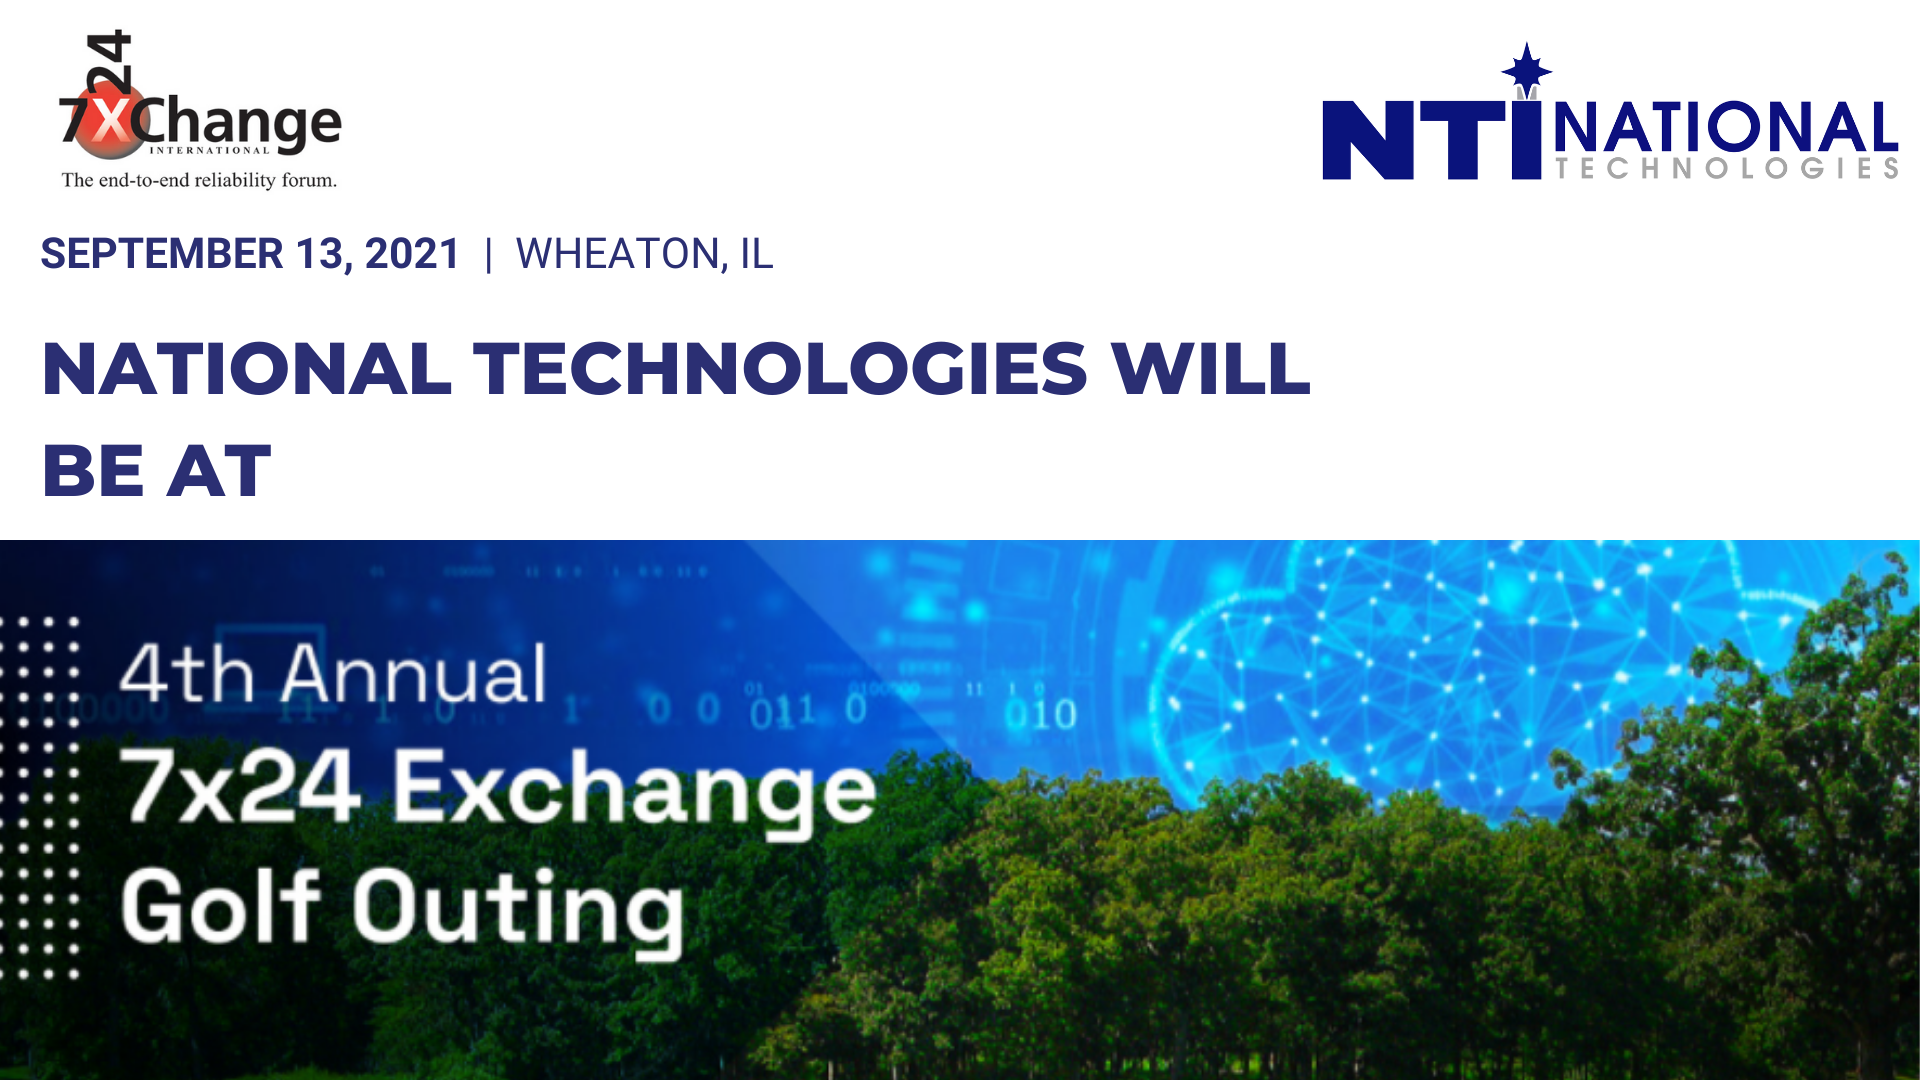 Graphic promoting the 2021 7x24 Exchange Golf Outing including 7x24 Exchange and NTI logos